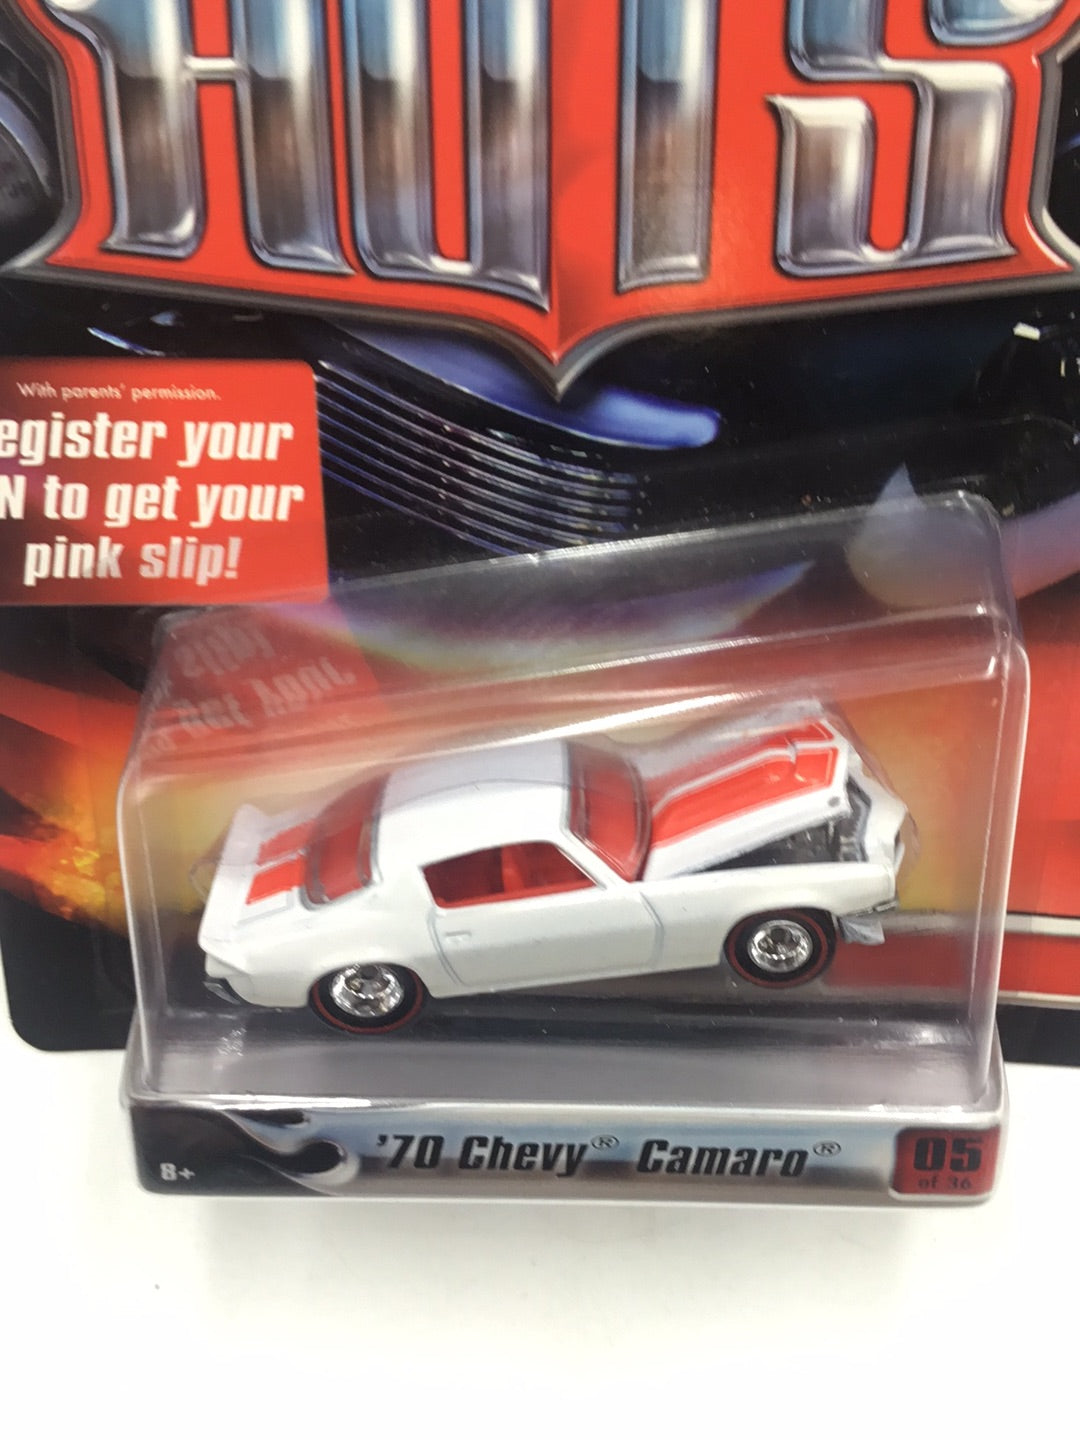 Hot wheels Ultra Hots 70 Chevy Camaro with Real Riders